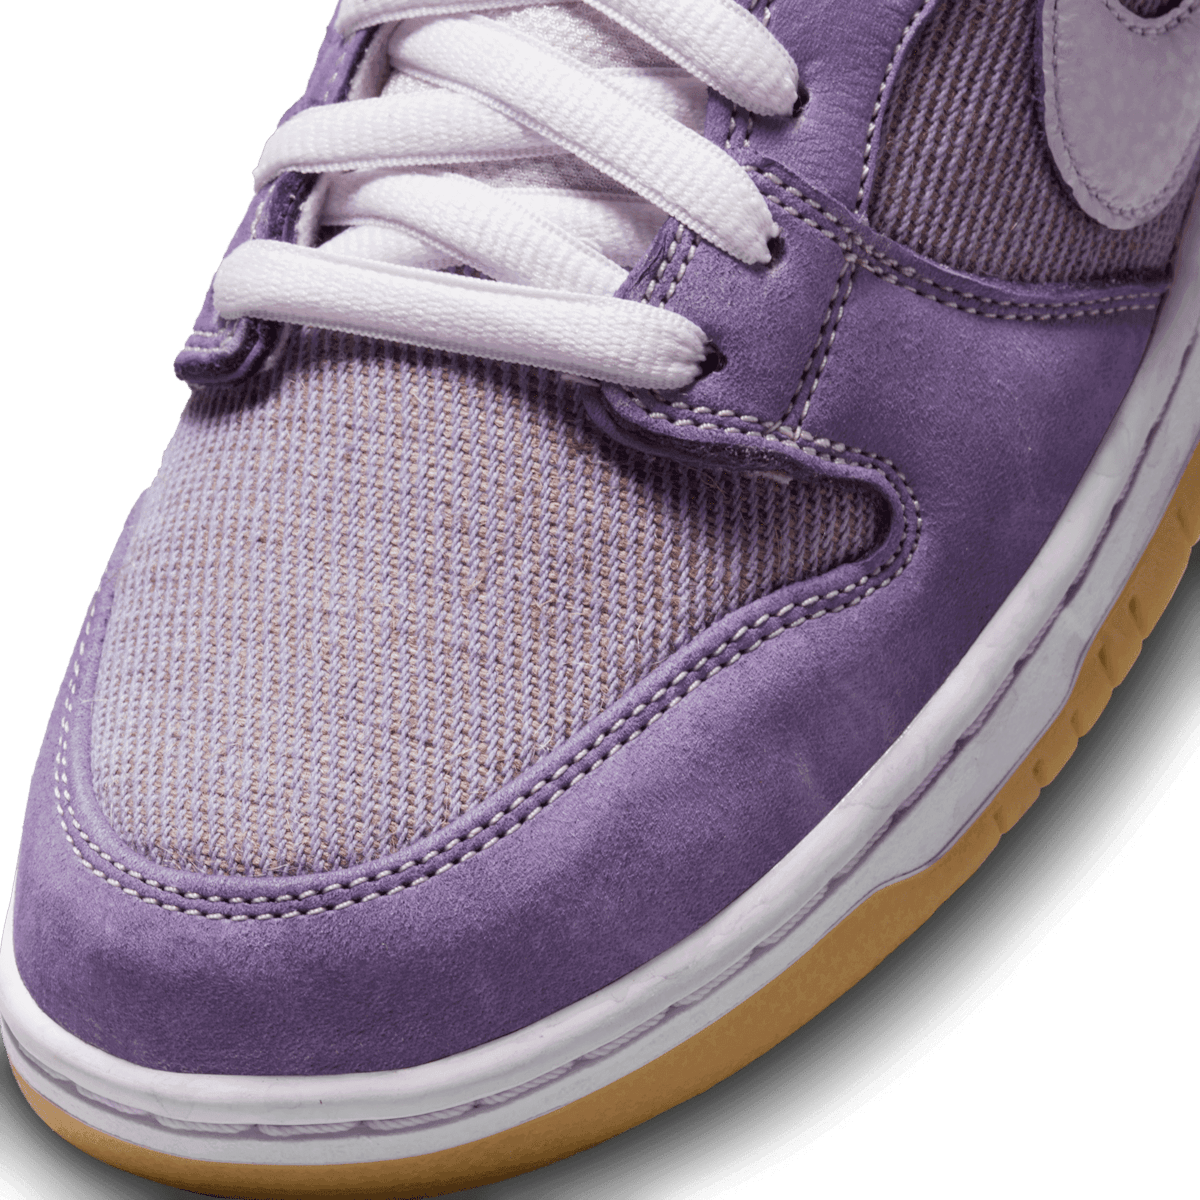 Nike SB Dunk Low Orange Label Unbleached Pack Lilac Angle 4